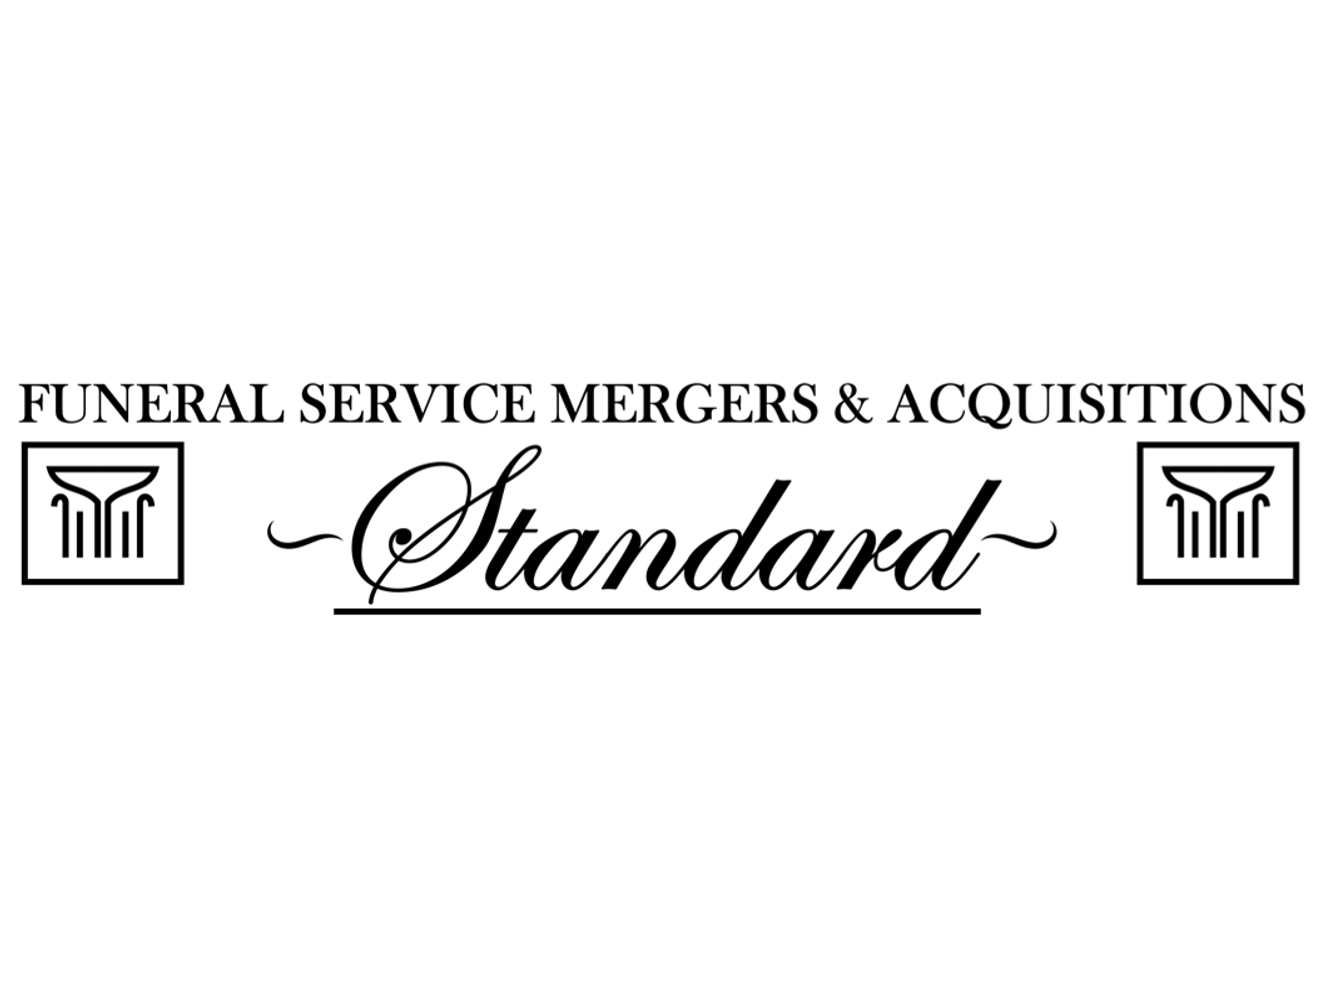 Standard Funeral Service Mergers & Acquisitions